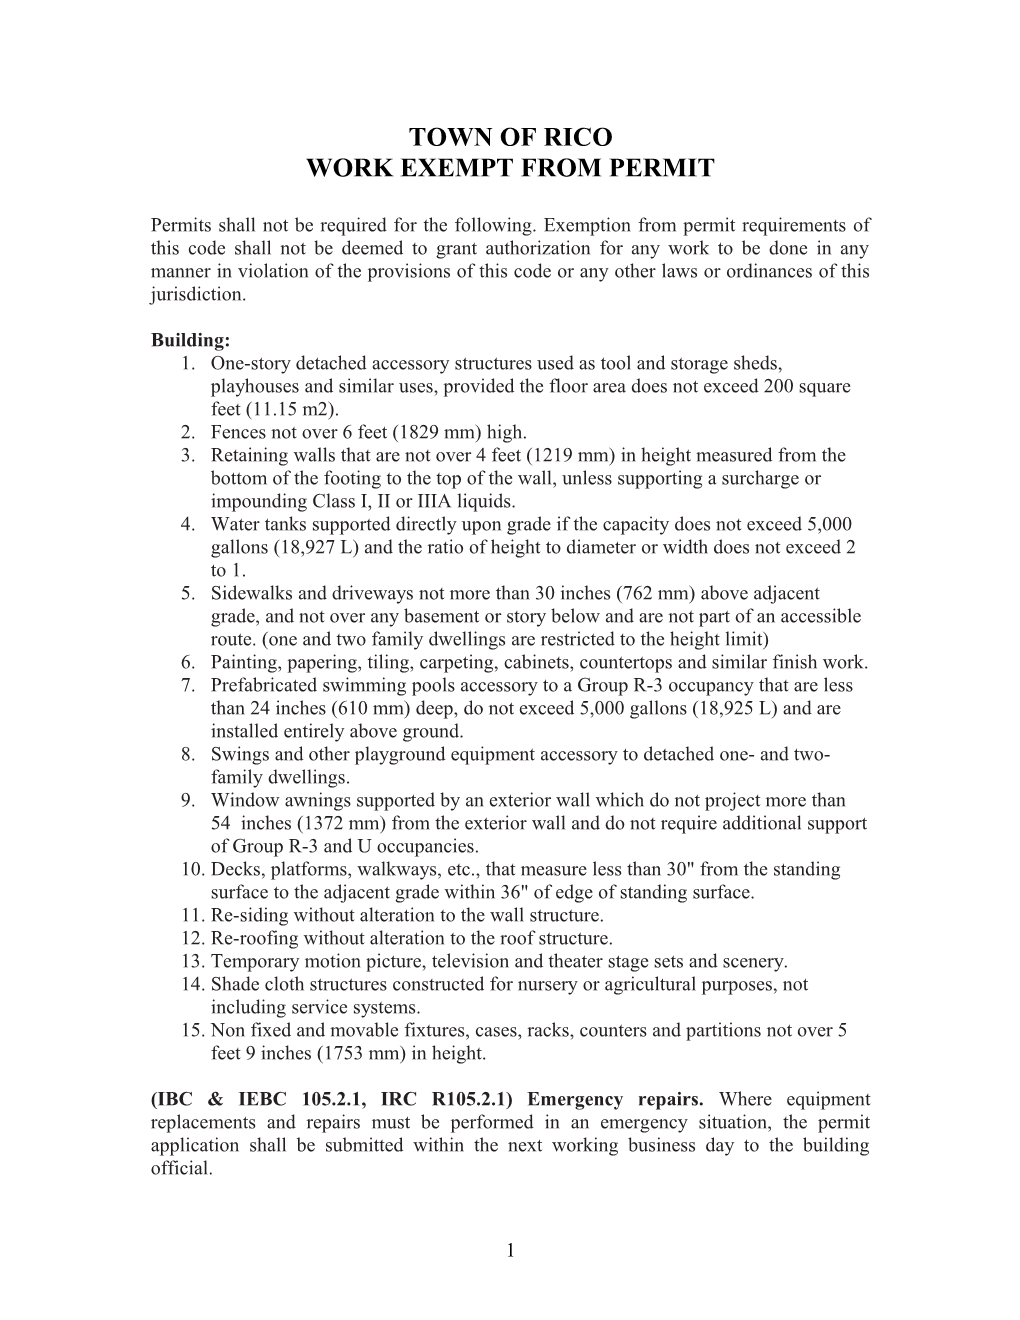 Work Exempt from Permit